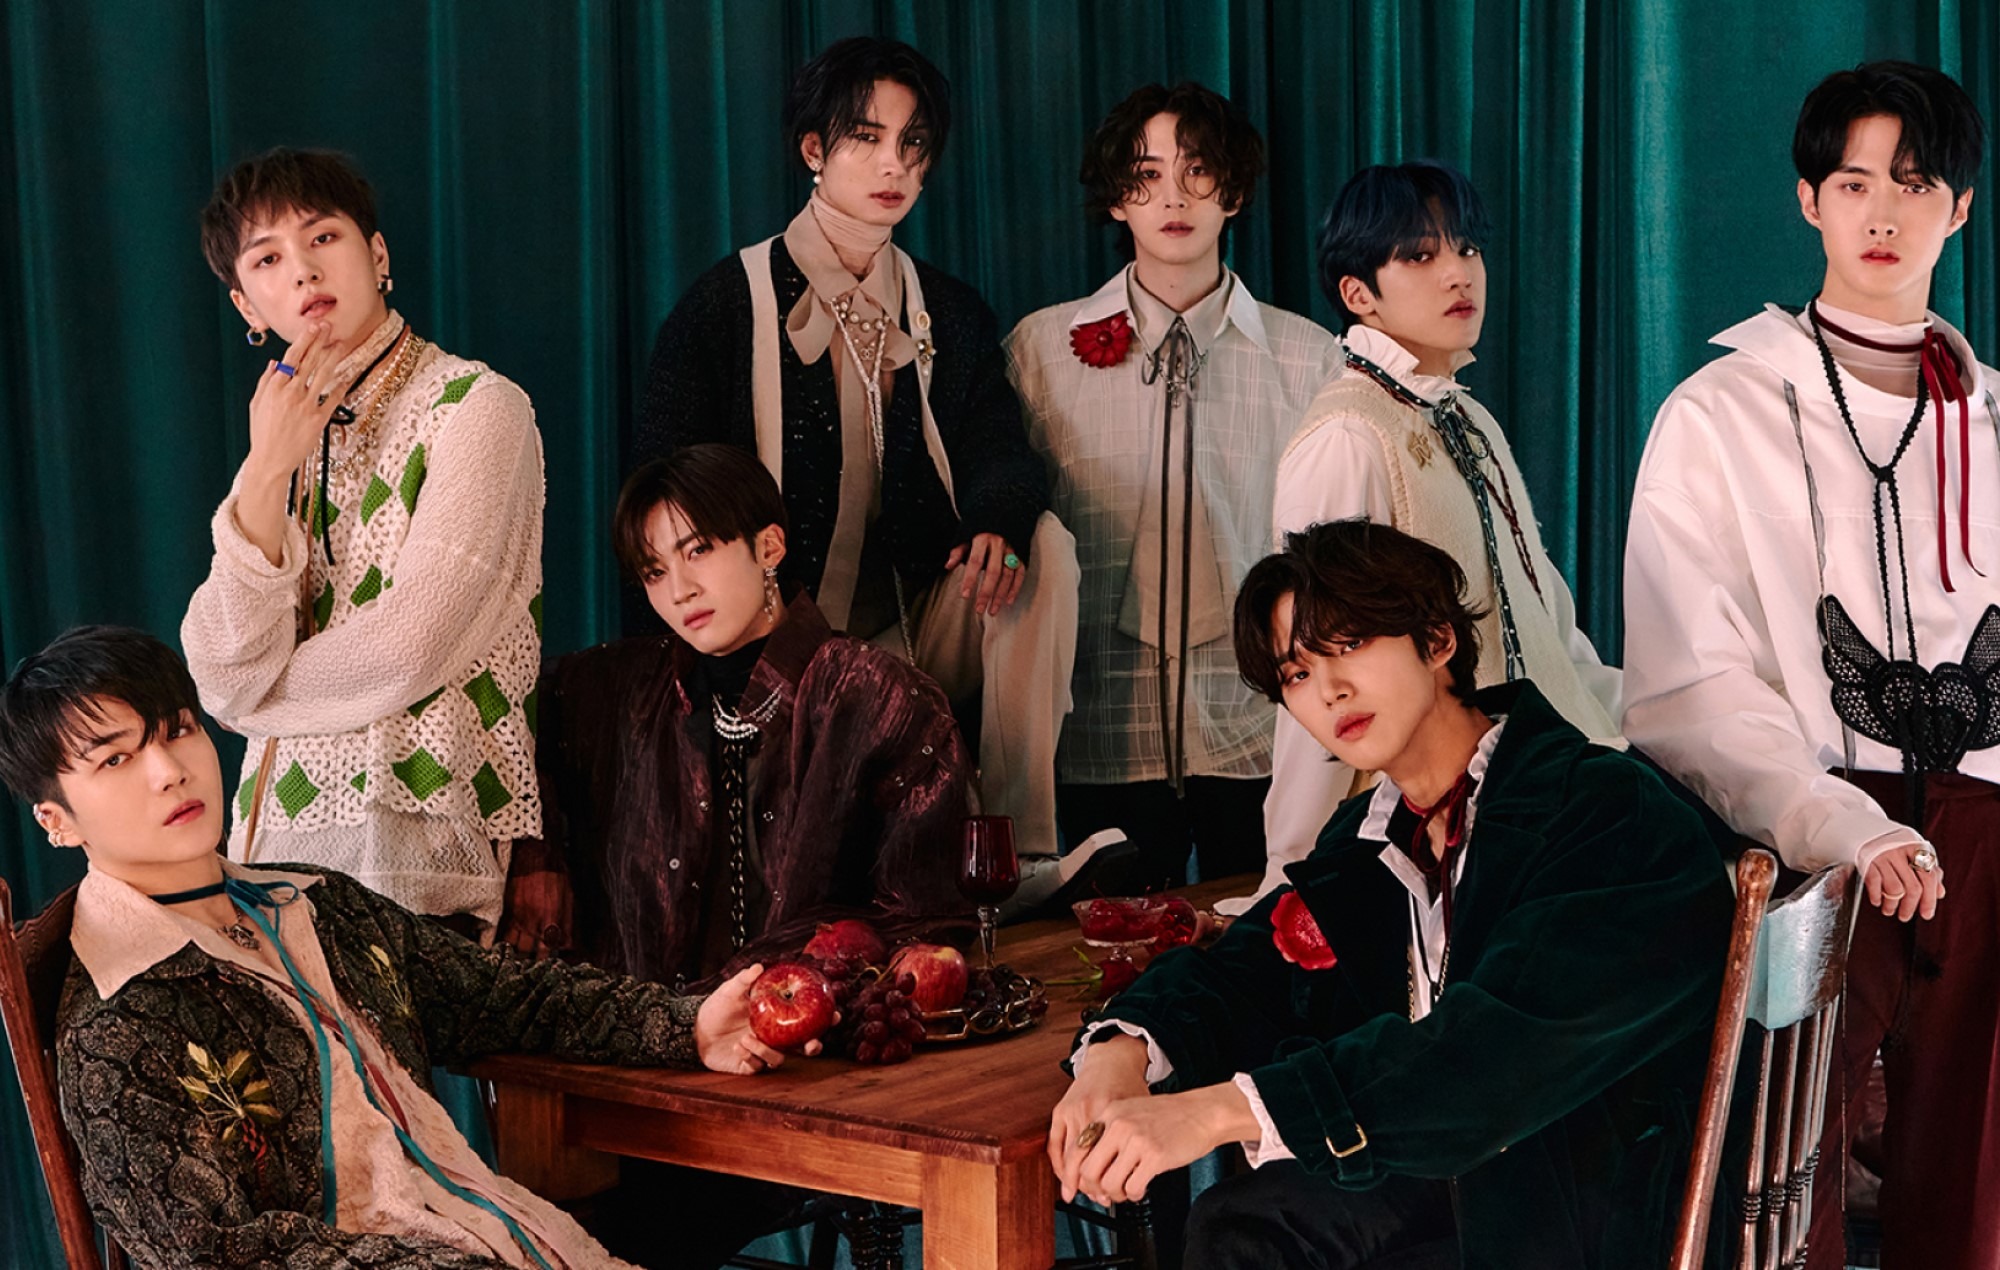 PENTAGON on new mini-album ‘IN:VITE U’: “Sometimes a miracle does happen”